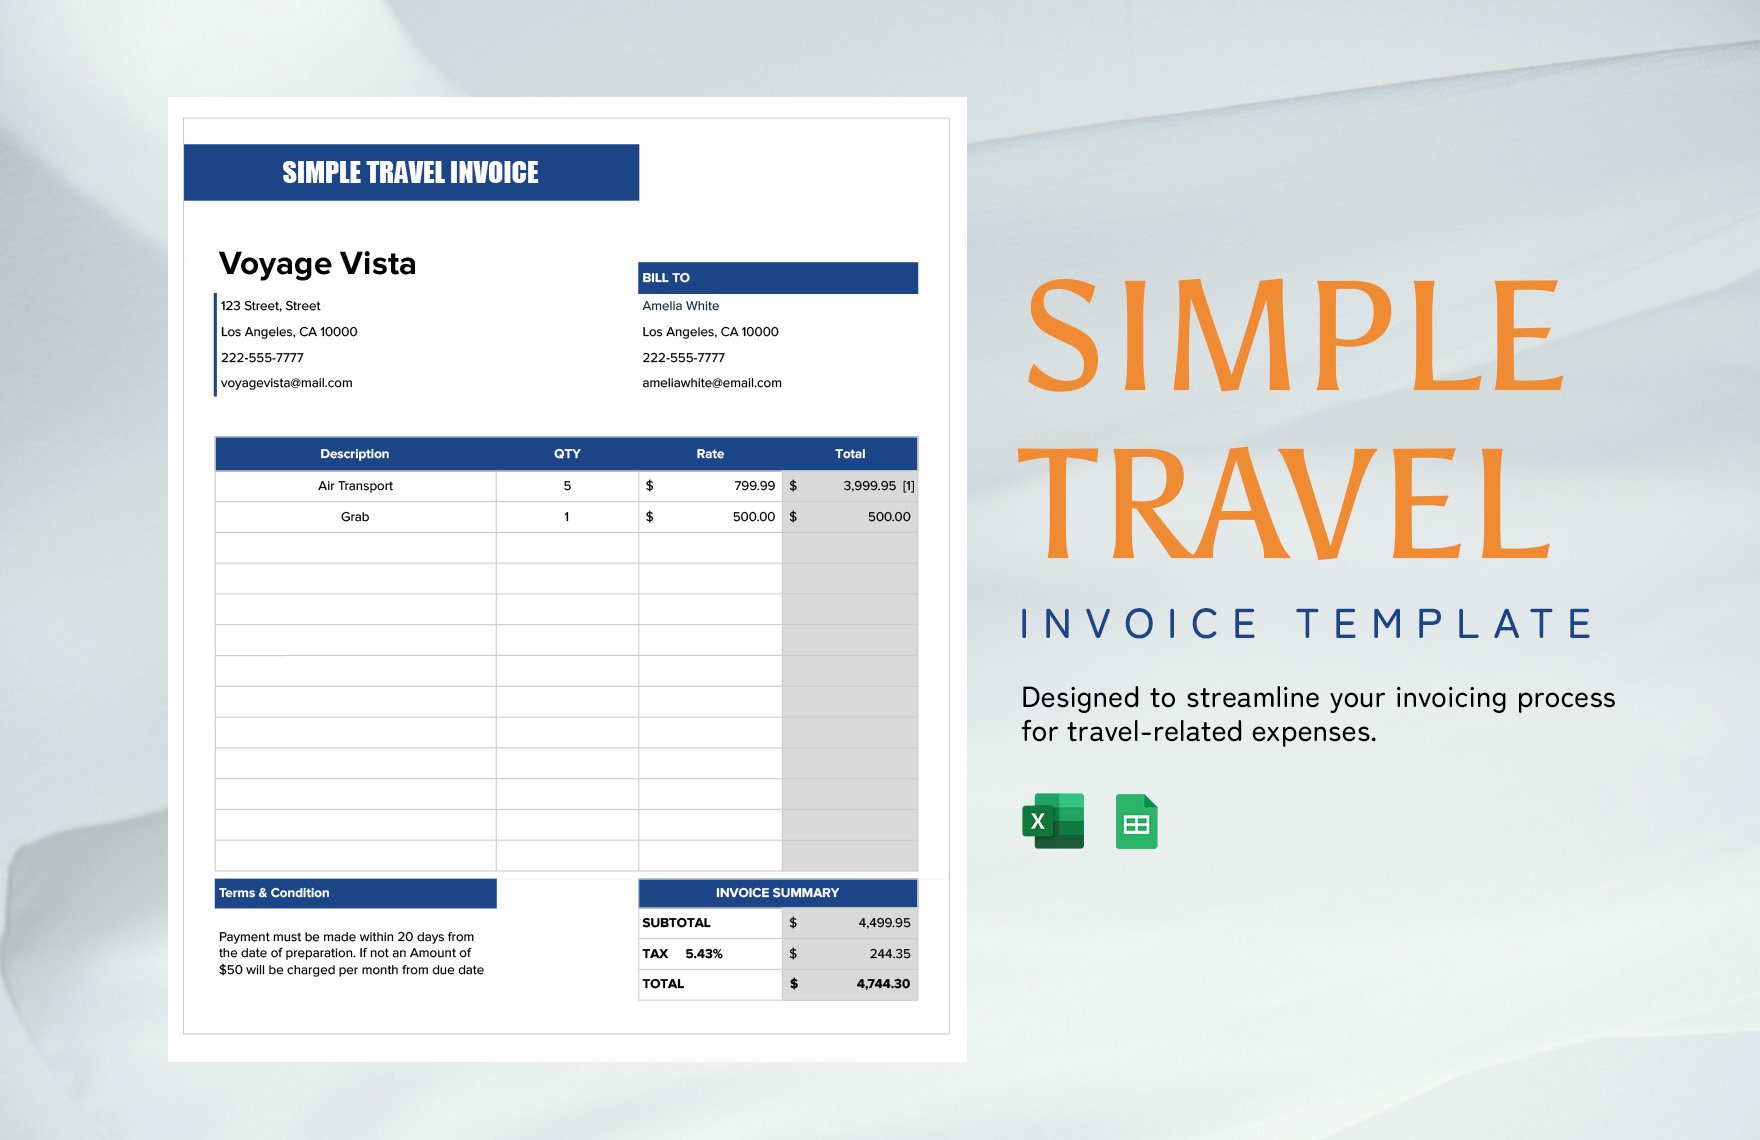 Free Simple Travel Invoice Template in Excel, Google Sheets